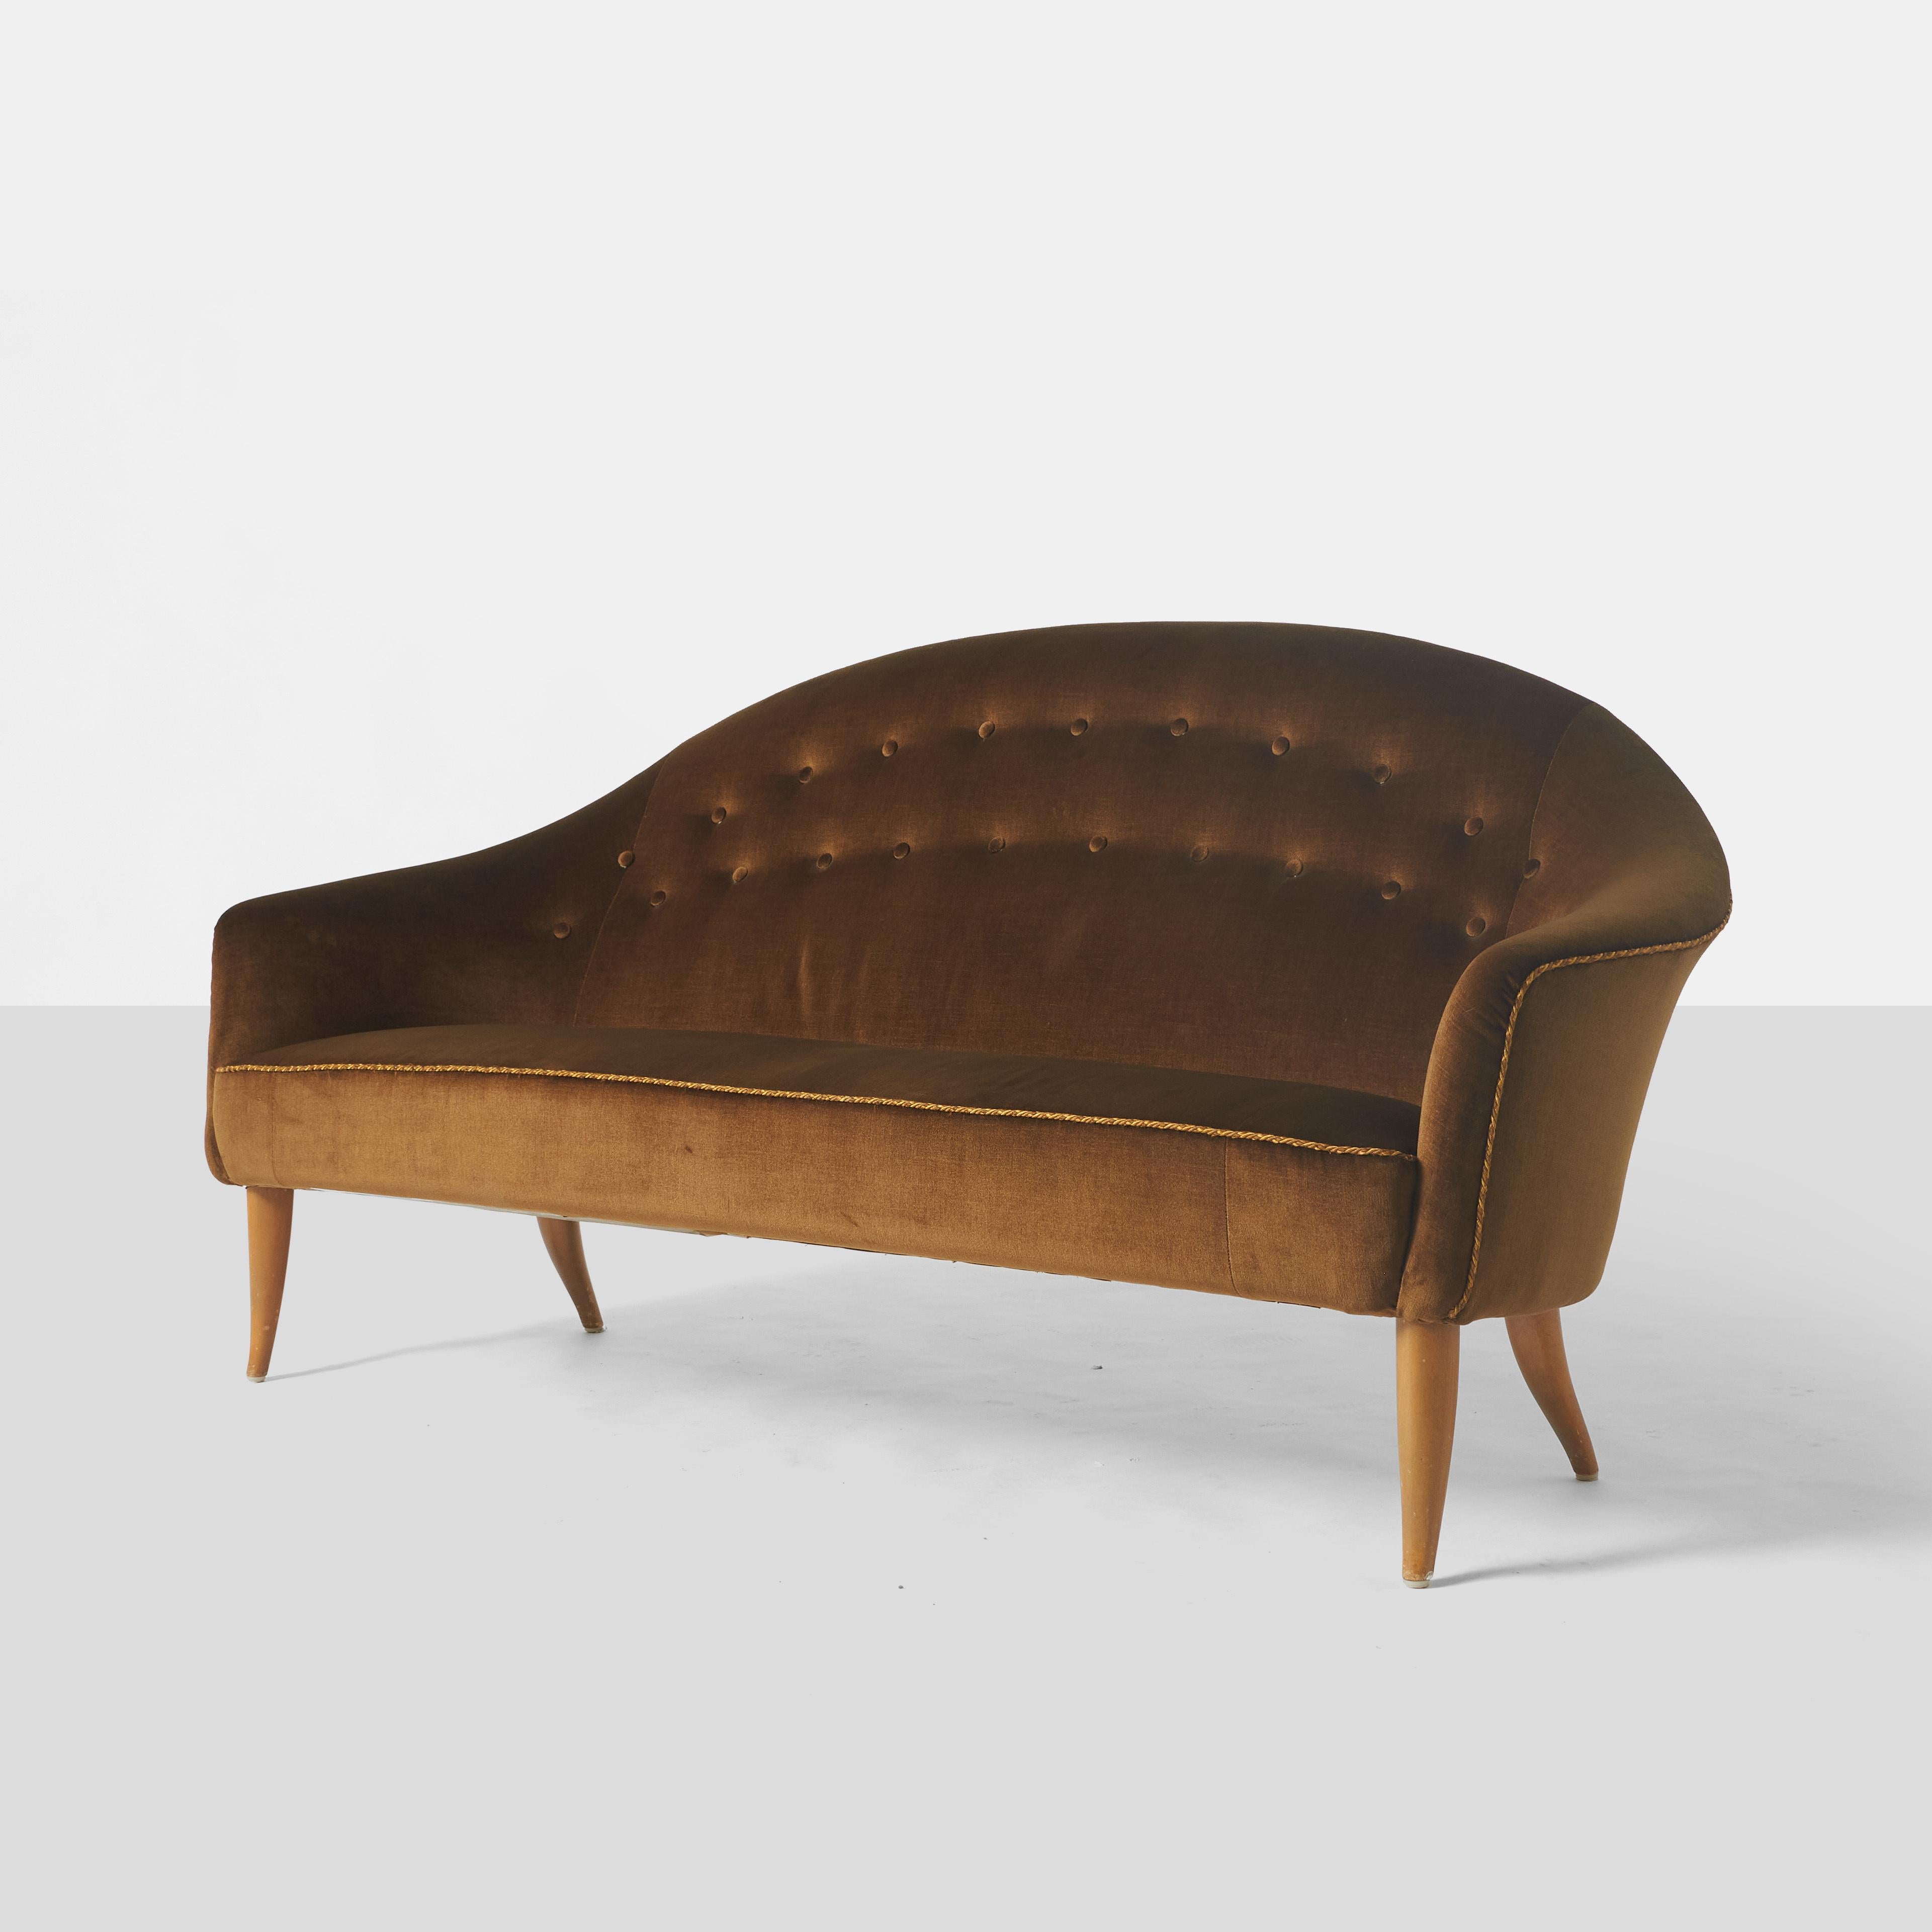 A tufted sofa from the Paradise collection by Kerstin Horlin-Holmquist for Nordiska Kompaniet with beech legs and upholstered in a brown sateen velvet with a twisted cord trim detail along the seat and back edges.

Matching high back and low back